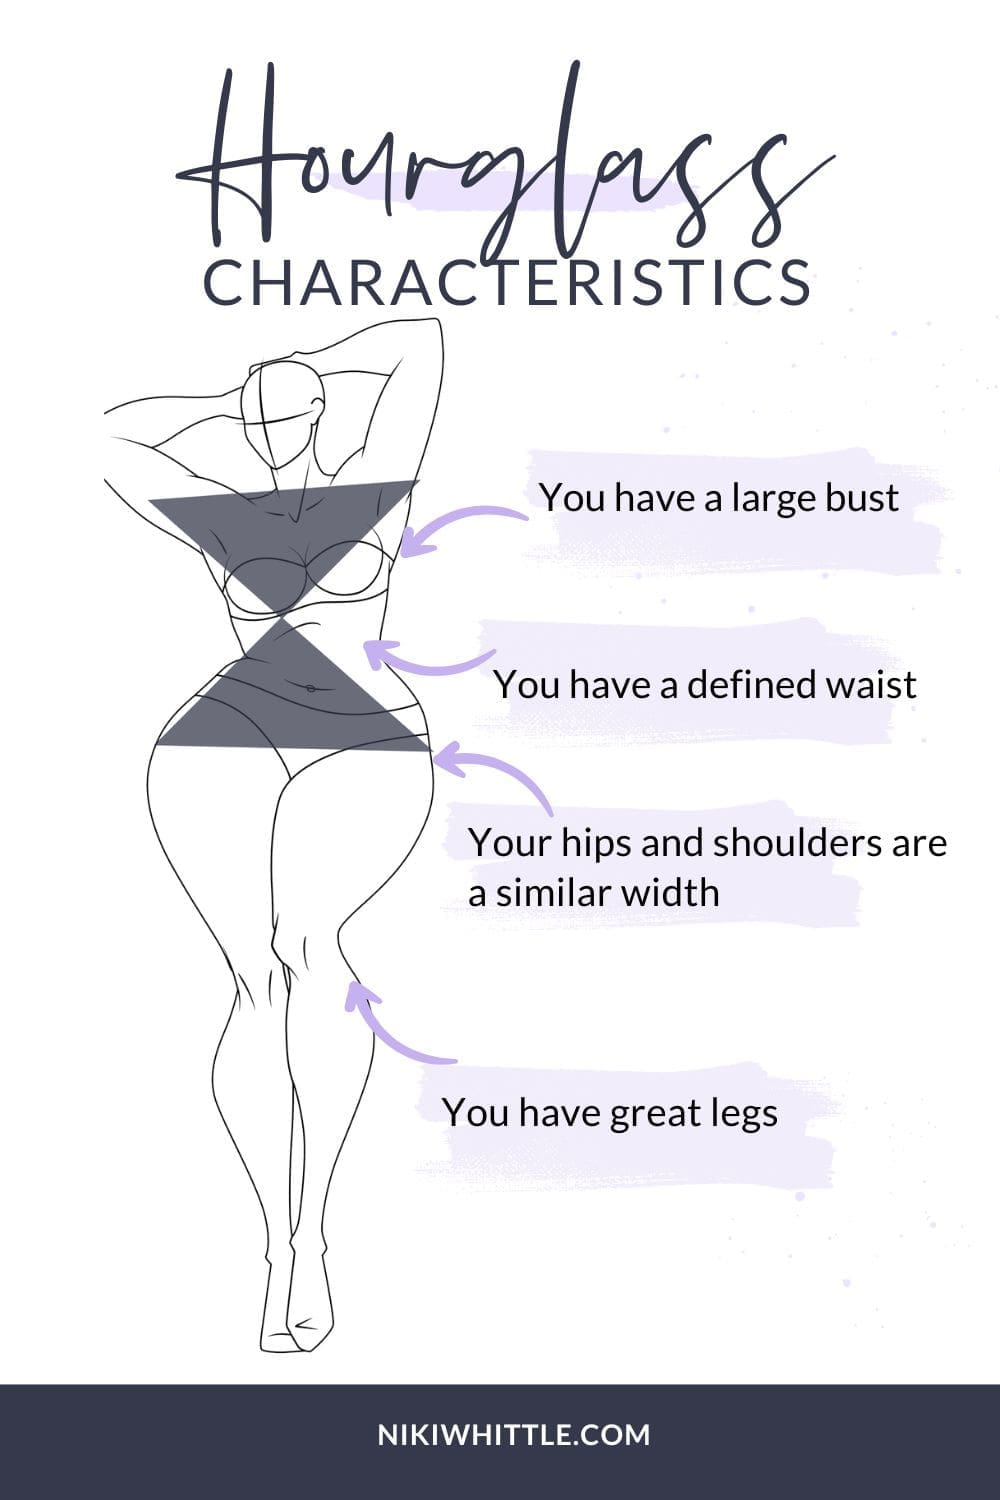 How To Dress An Hourglass Body Shape - A Personal Stylist's Guide